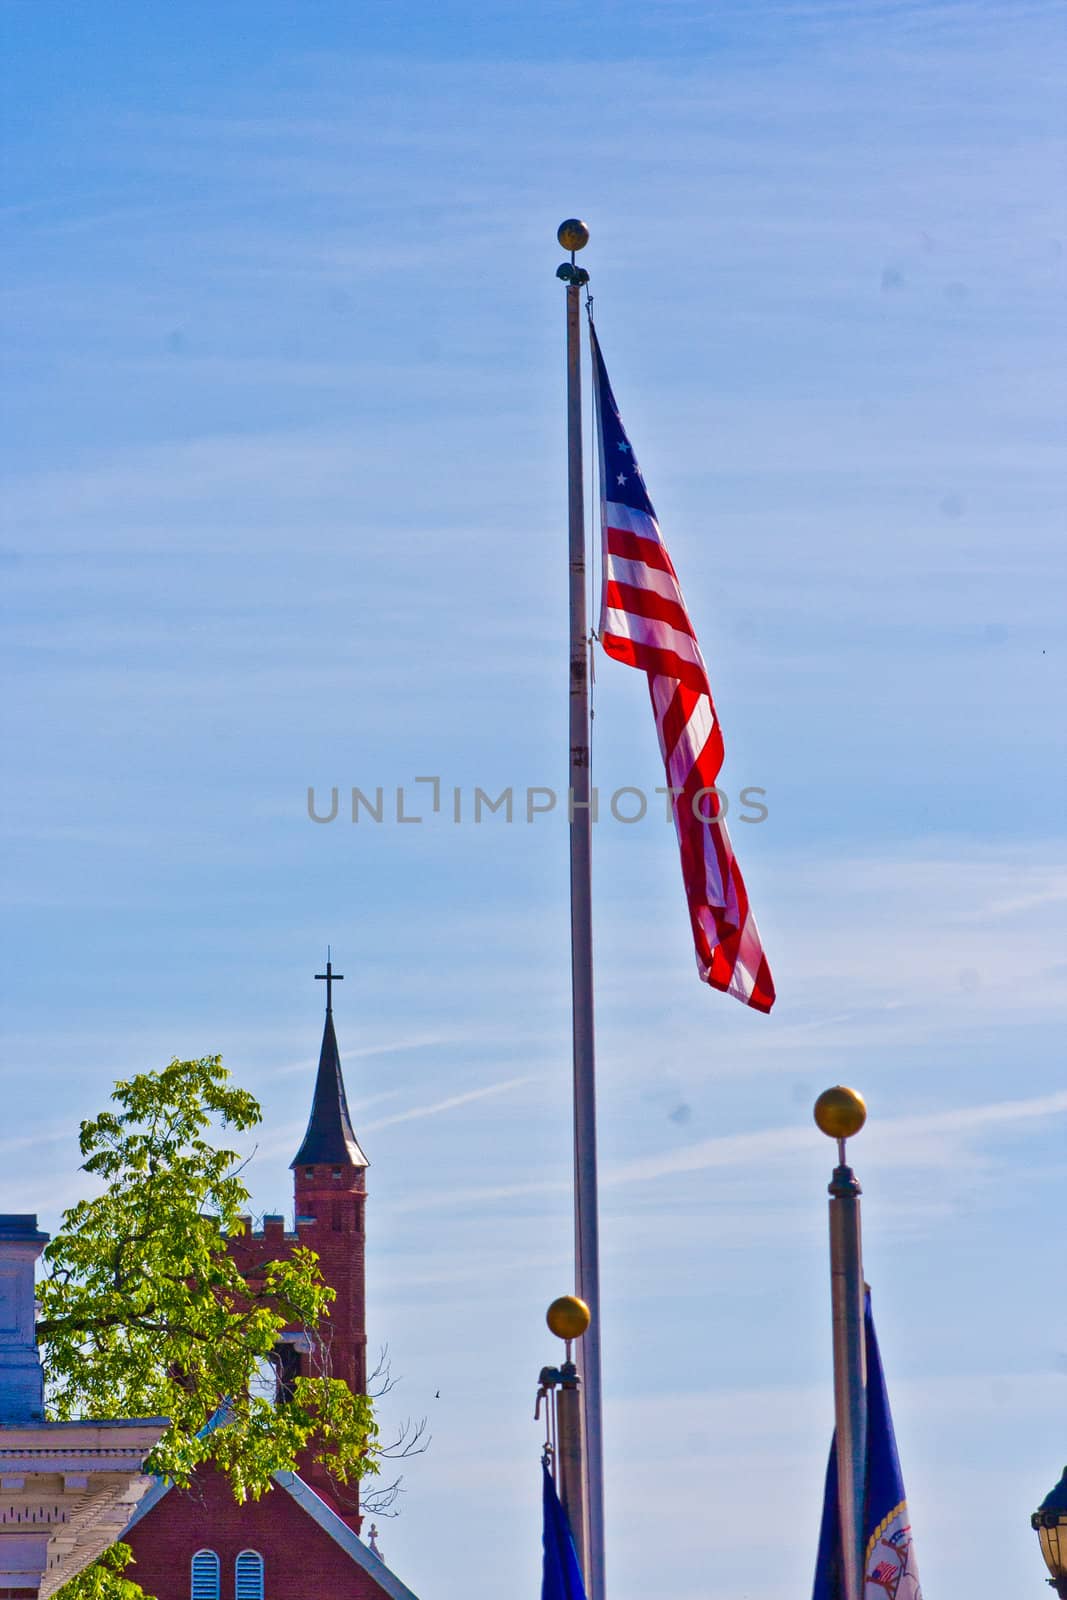 A single American flag stands high amongst church steeples.